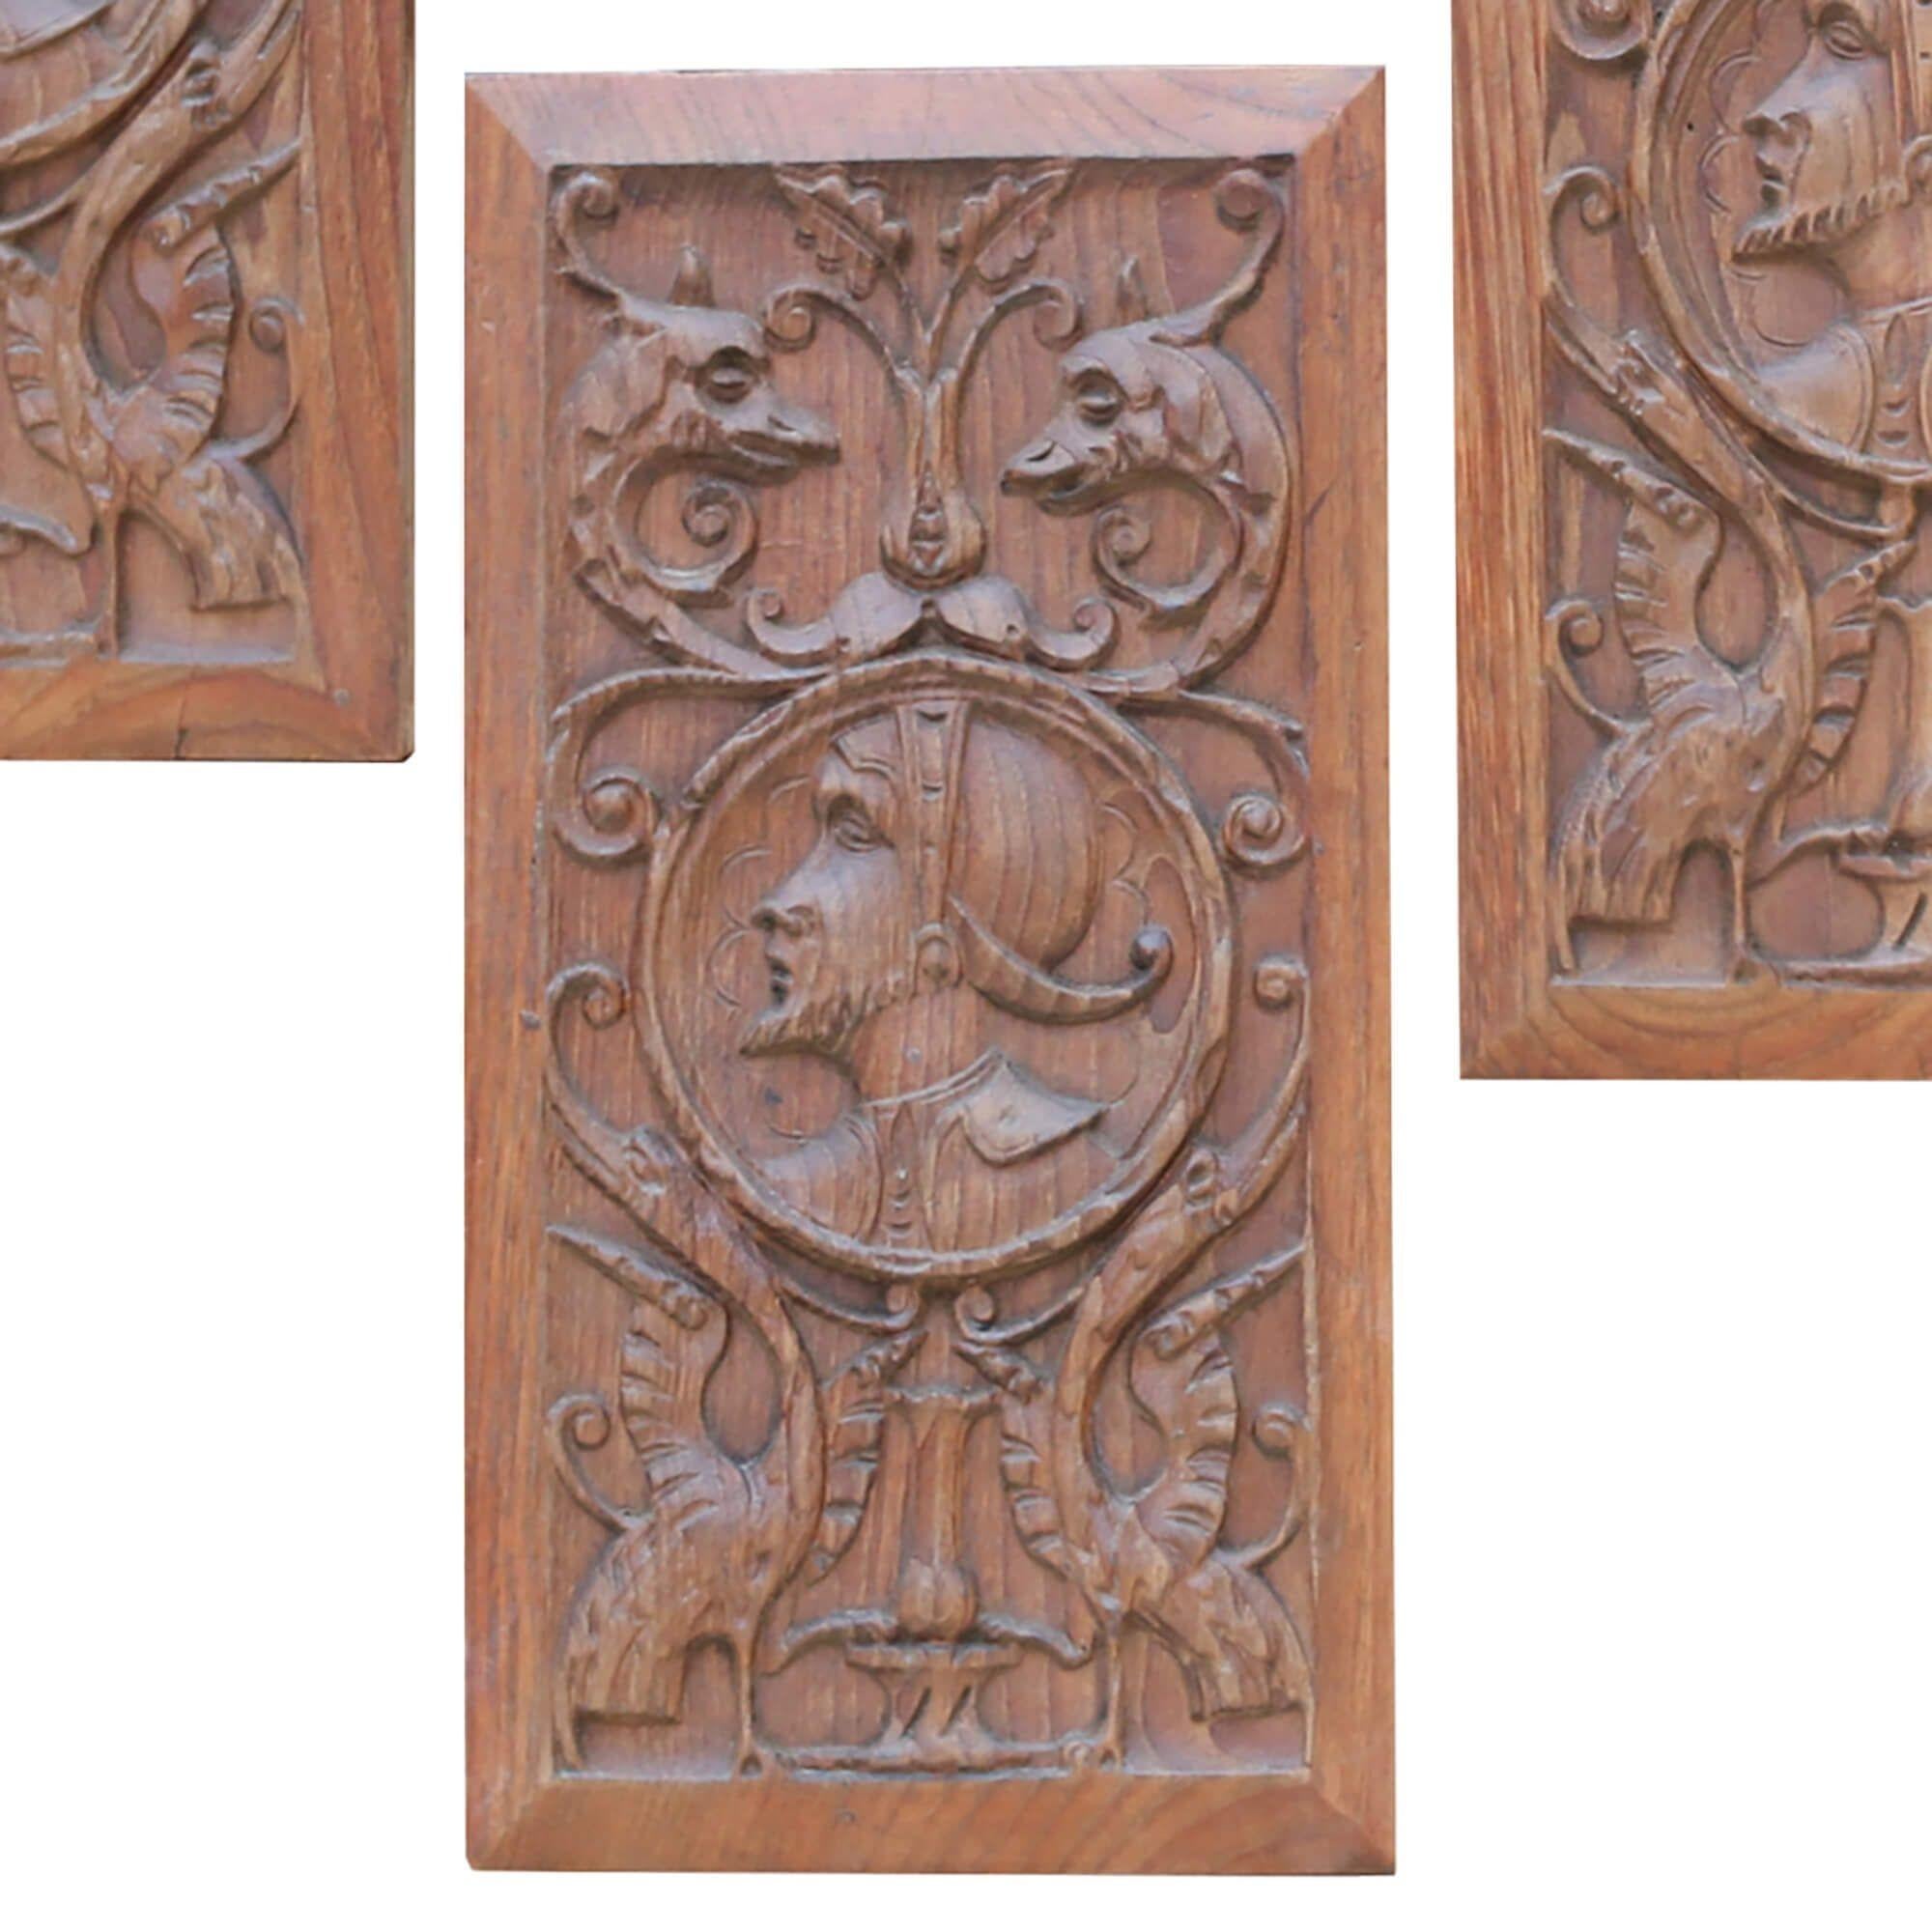 Four handsomely carved antique oak panels depicting mythical creatures and gentlemen in period costume. Dating from the early 20th century, these beautiful panels are handcrafted, making a beautiful feature on an interior wall in a period property.